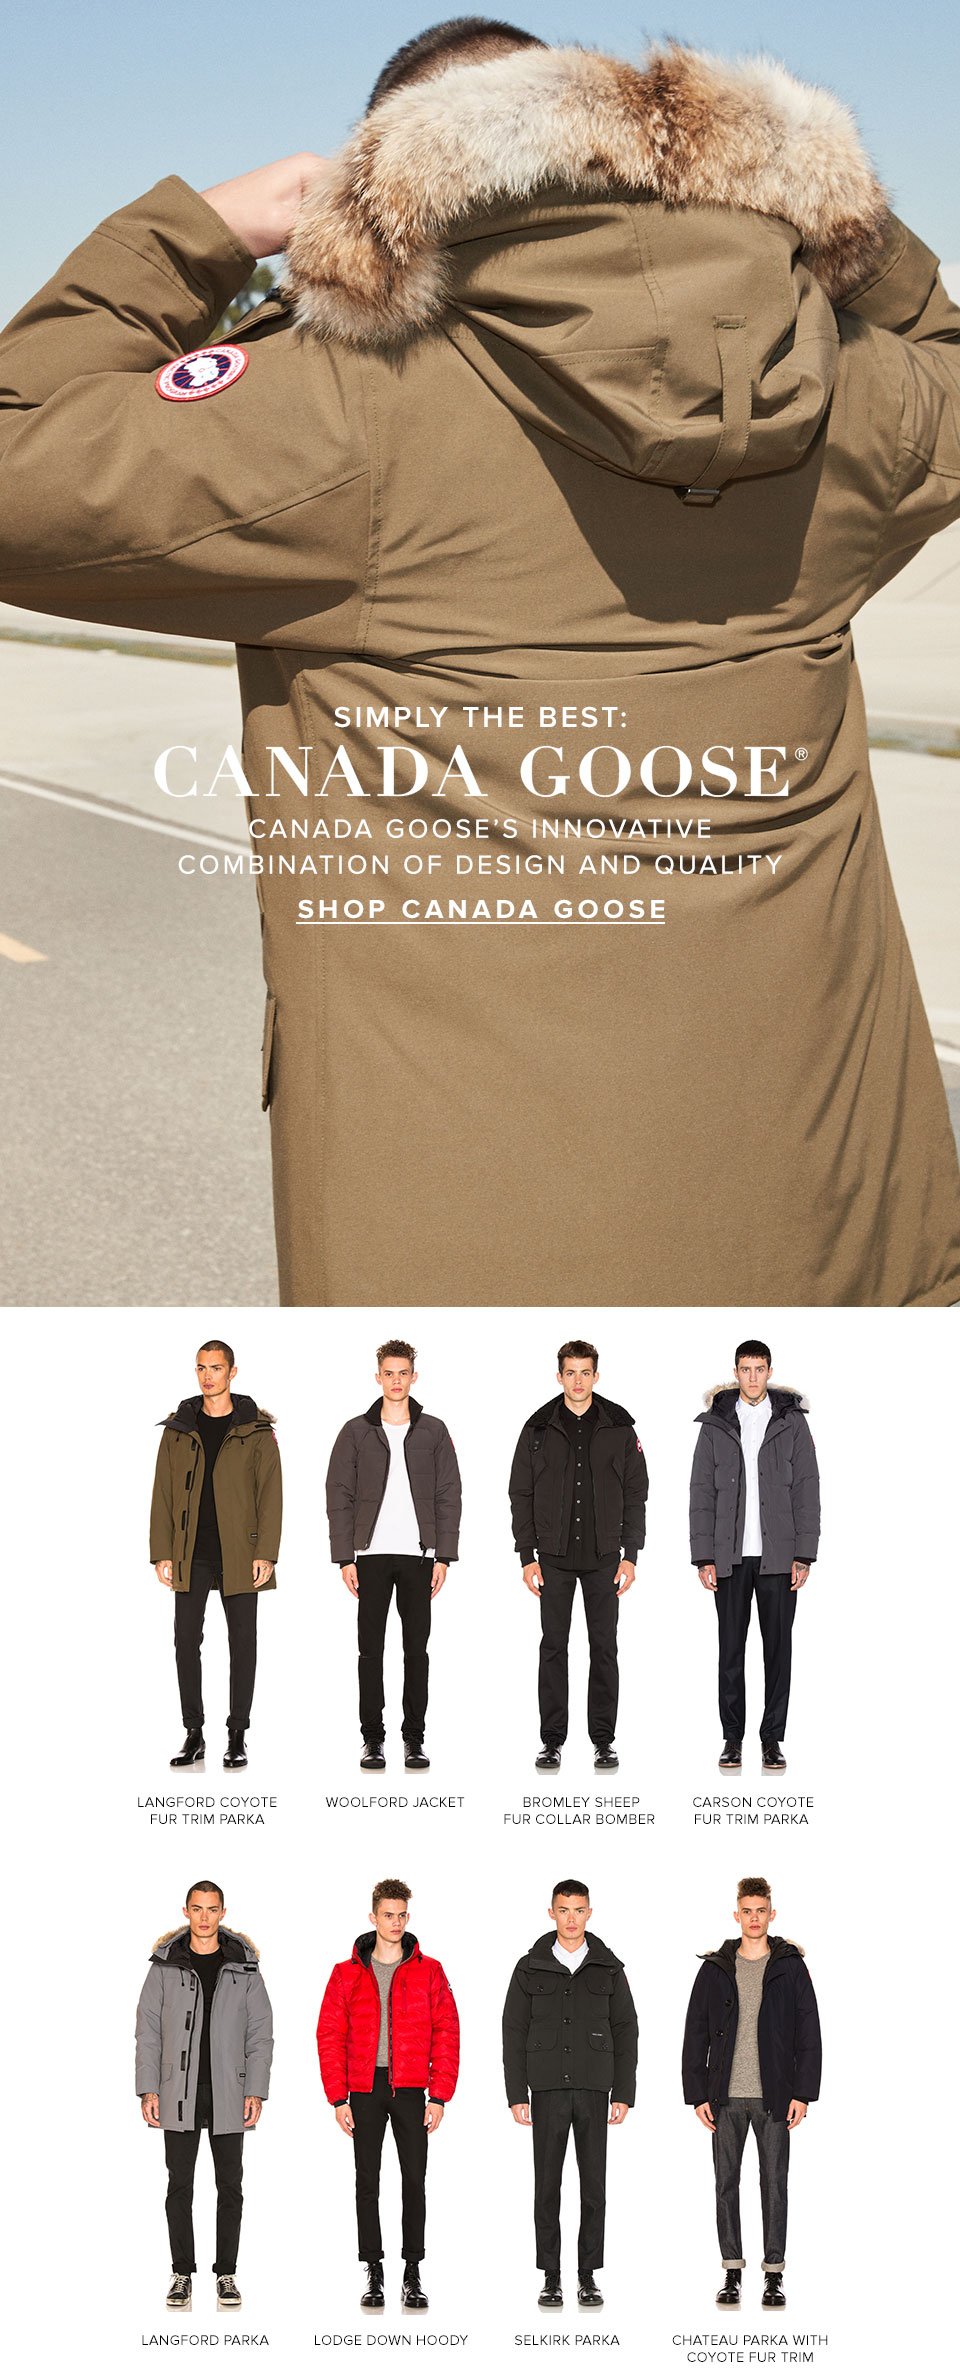 Simply the Best: Canada Goose. Canada Goose's innovative combination of design and quality. Shop Now.